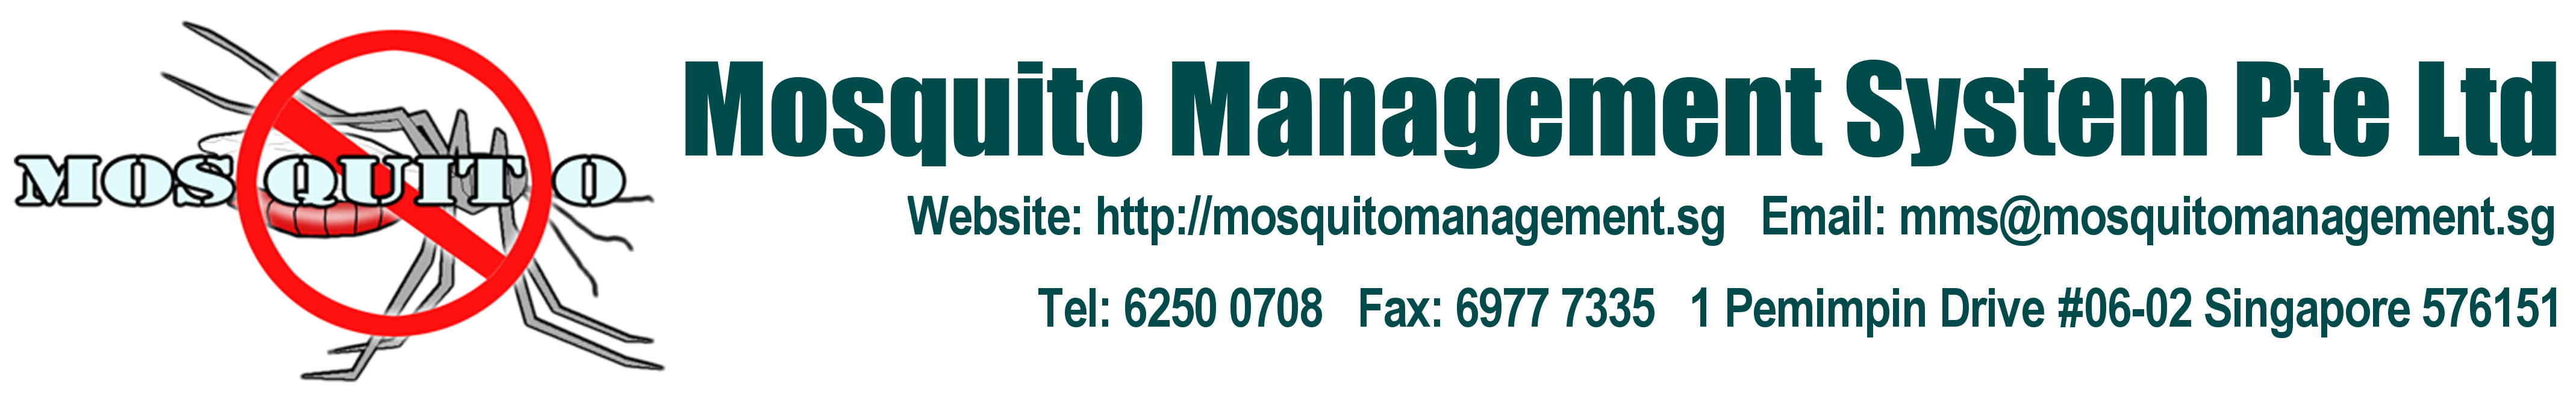 Mosquito Management System